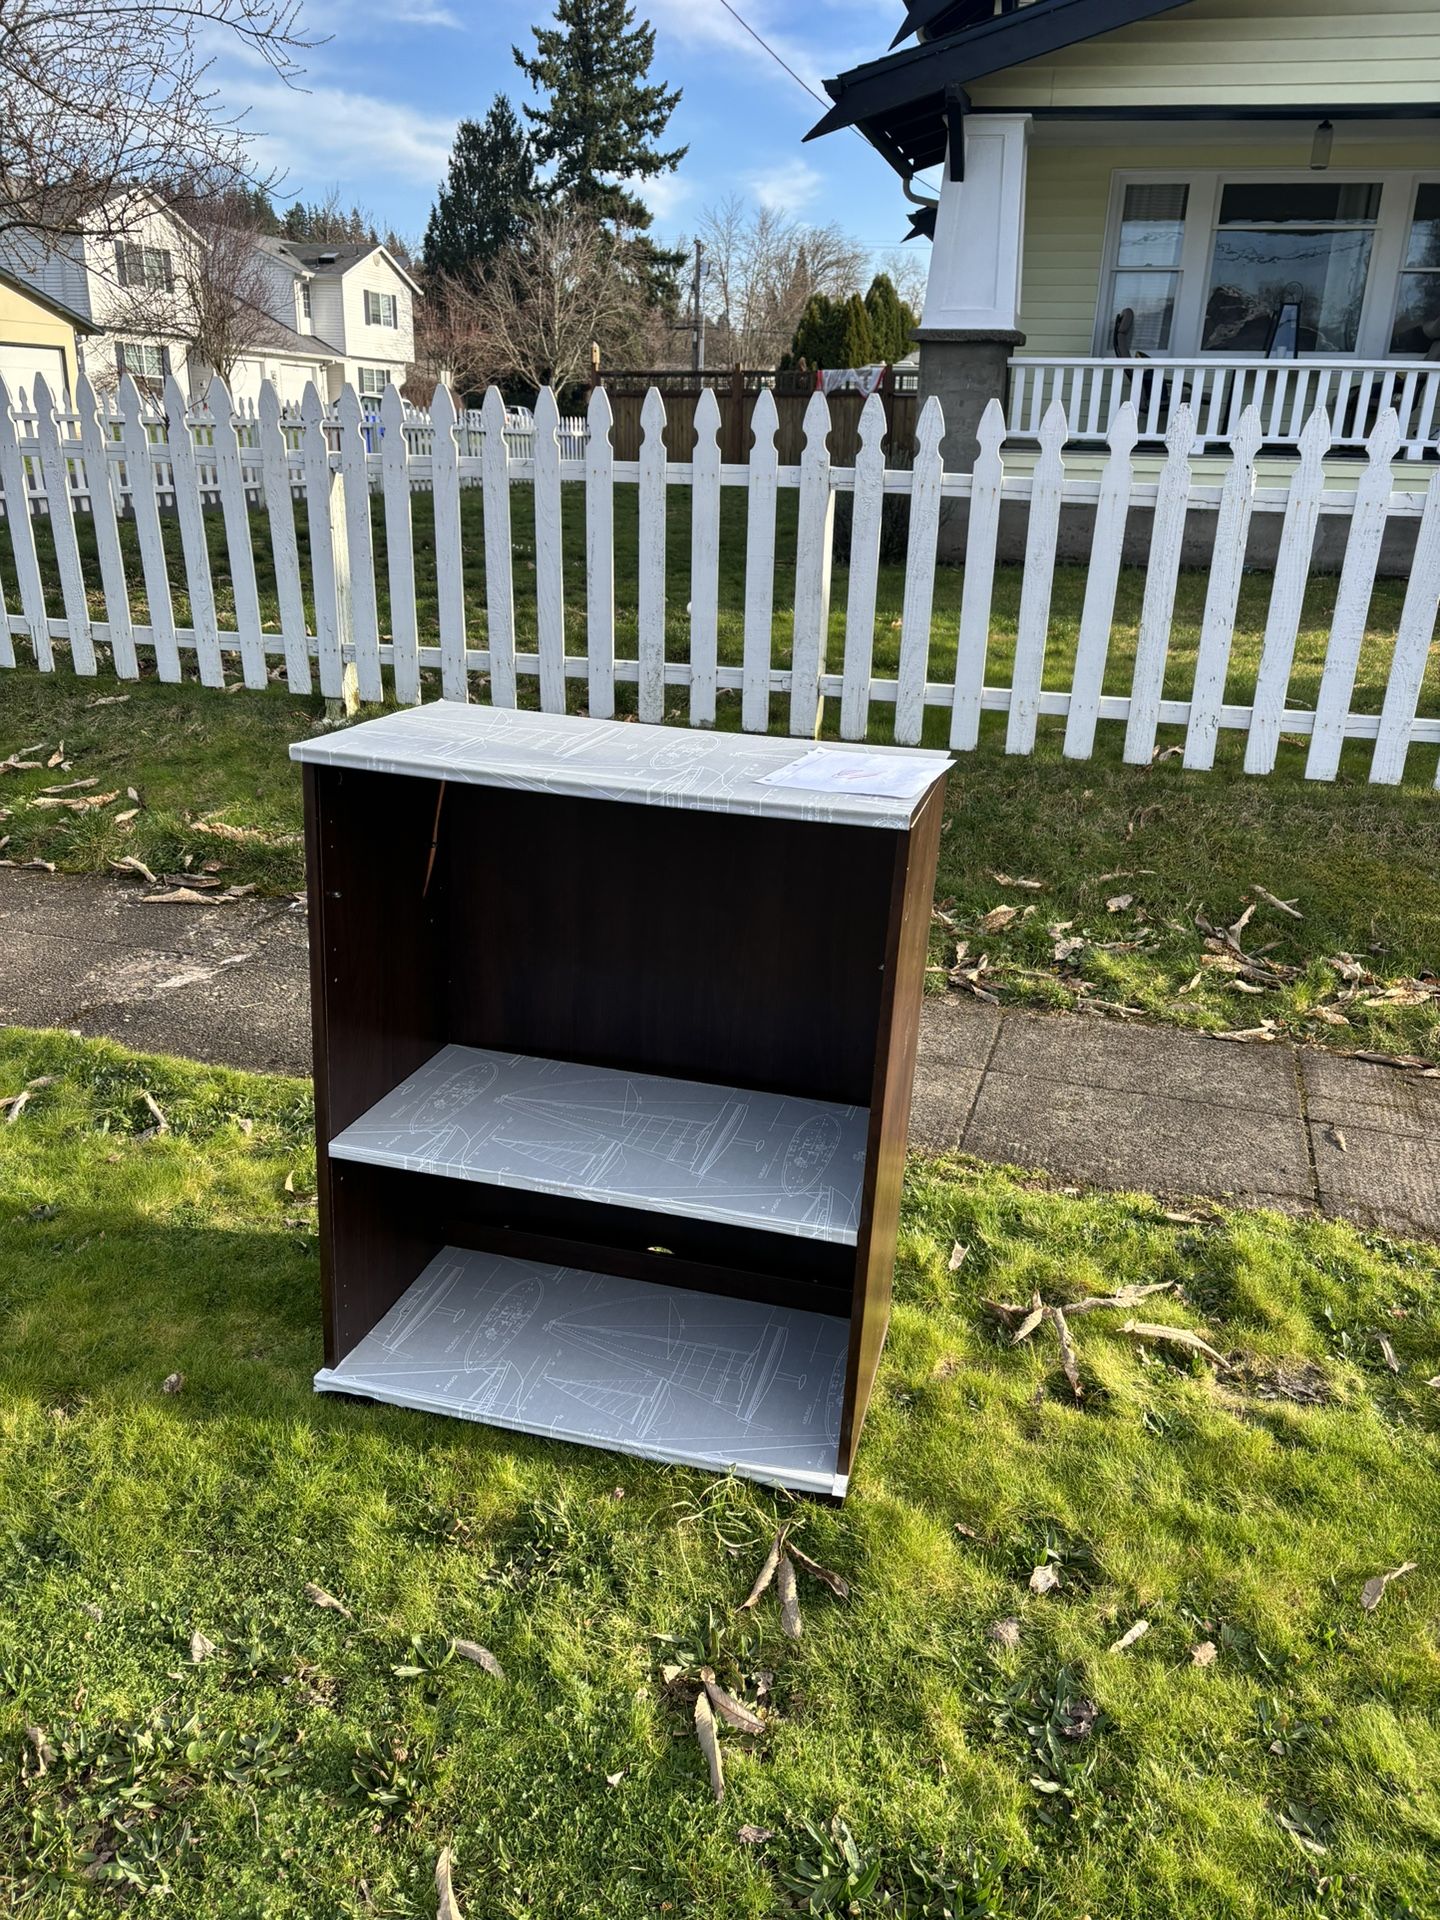 Free Bookshelf, Has One Shelf And Holders For An Additional